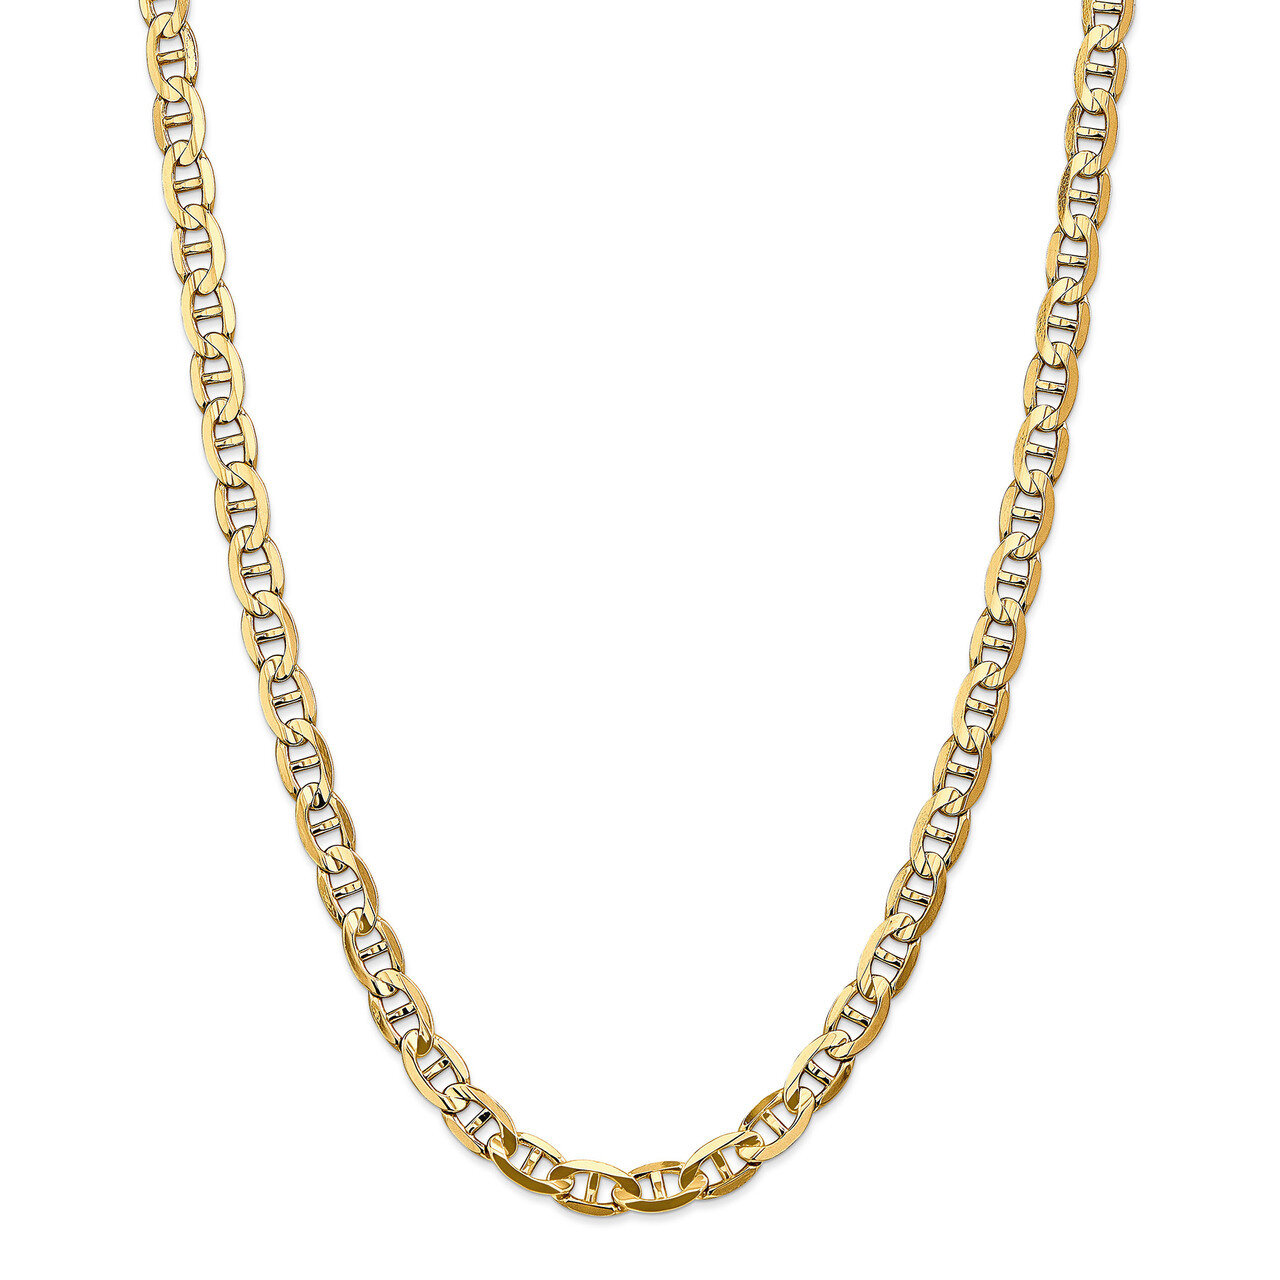 26 Inch 7mm Concave Anchor Chain 14k Gold CCA180-26